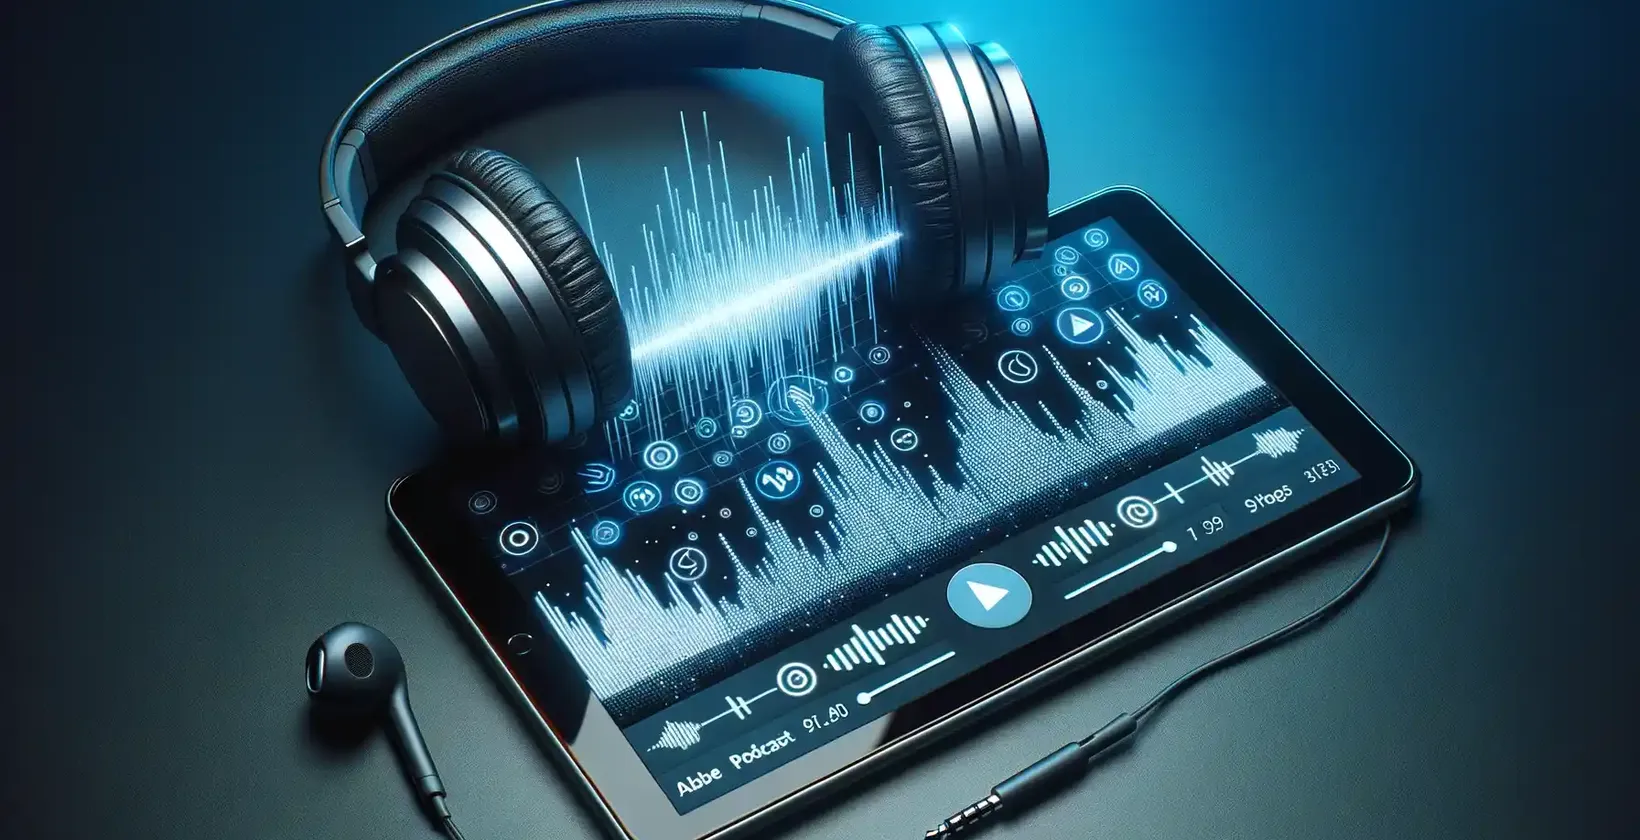 The tablet screen vibrantly shows sound waves, digital buttons, and settings against a deep blue backdrop